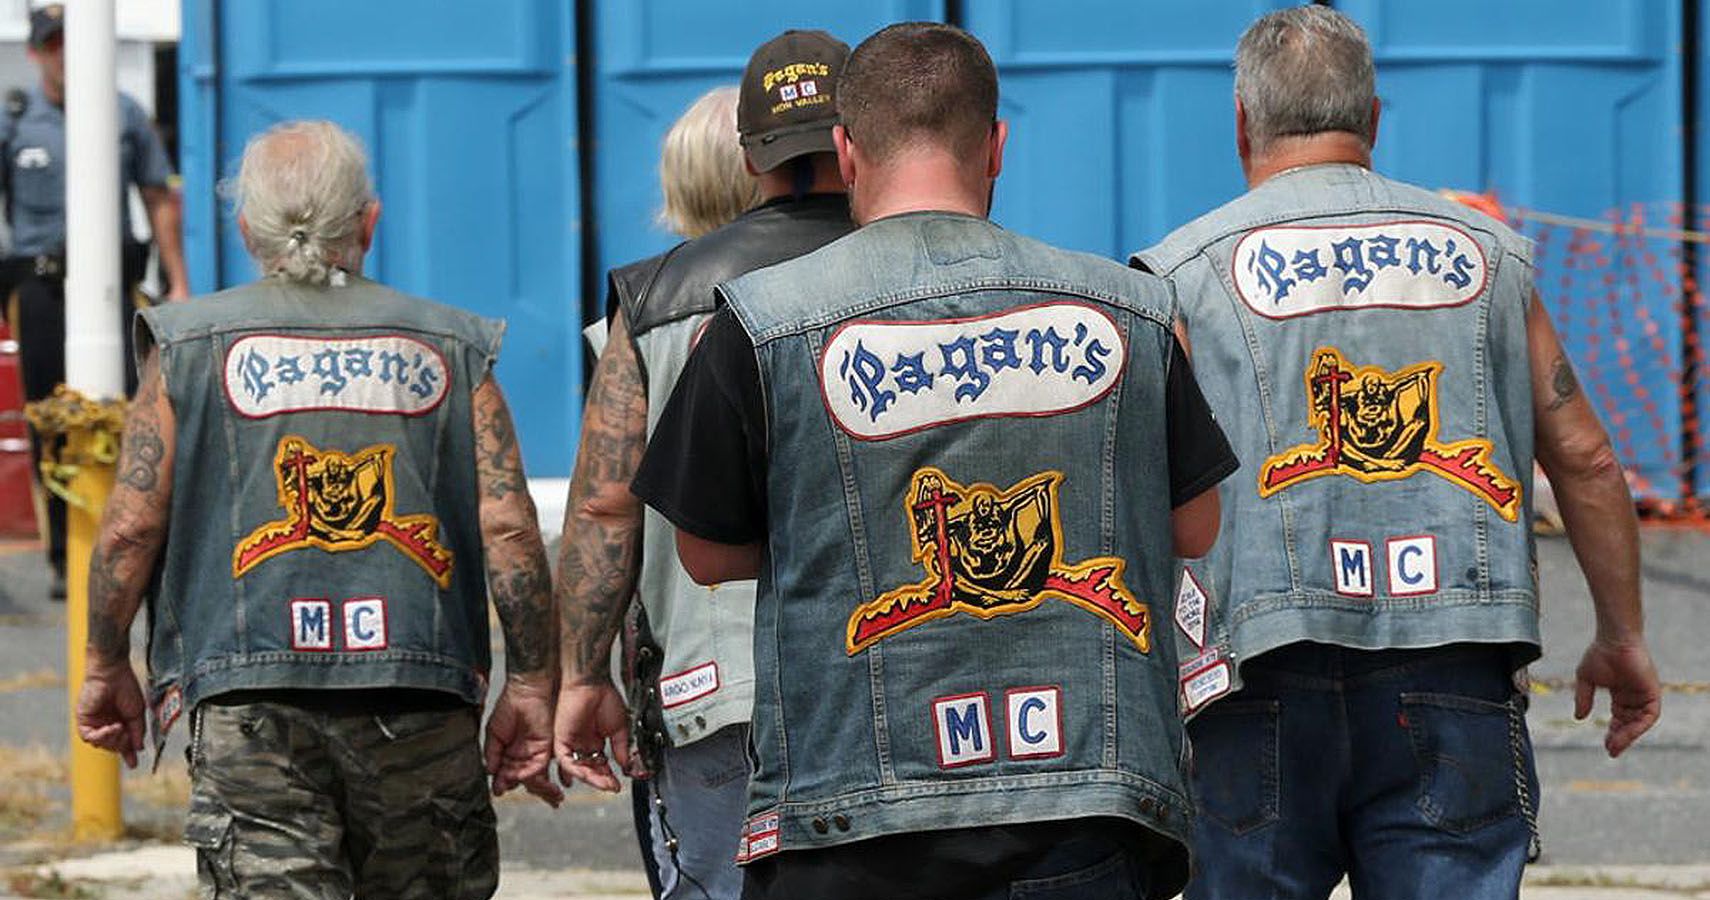 Pagans MC Was Formed With 13 Members